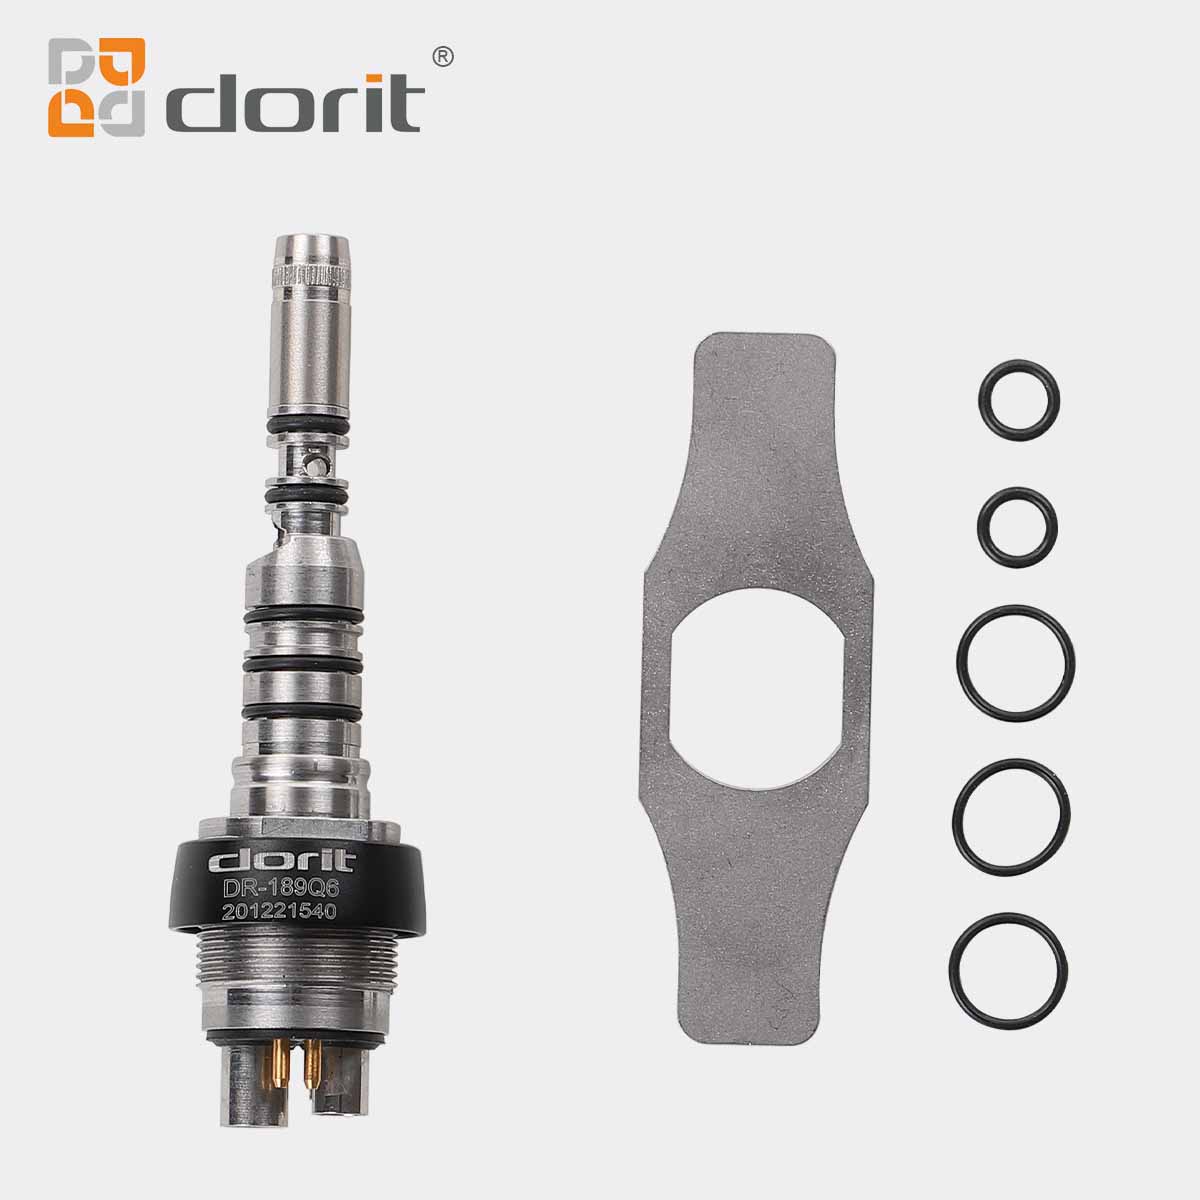 DORIT DR-189 New Fiber optic high speed handpiece with 2 or 4 holes connection KaVo type led couplings